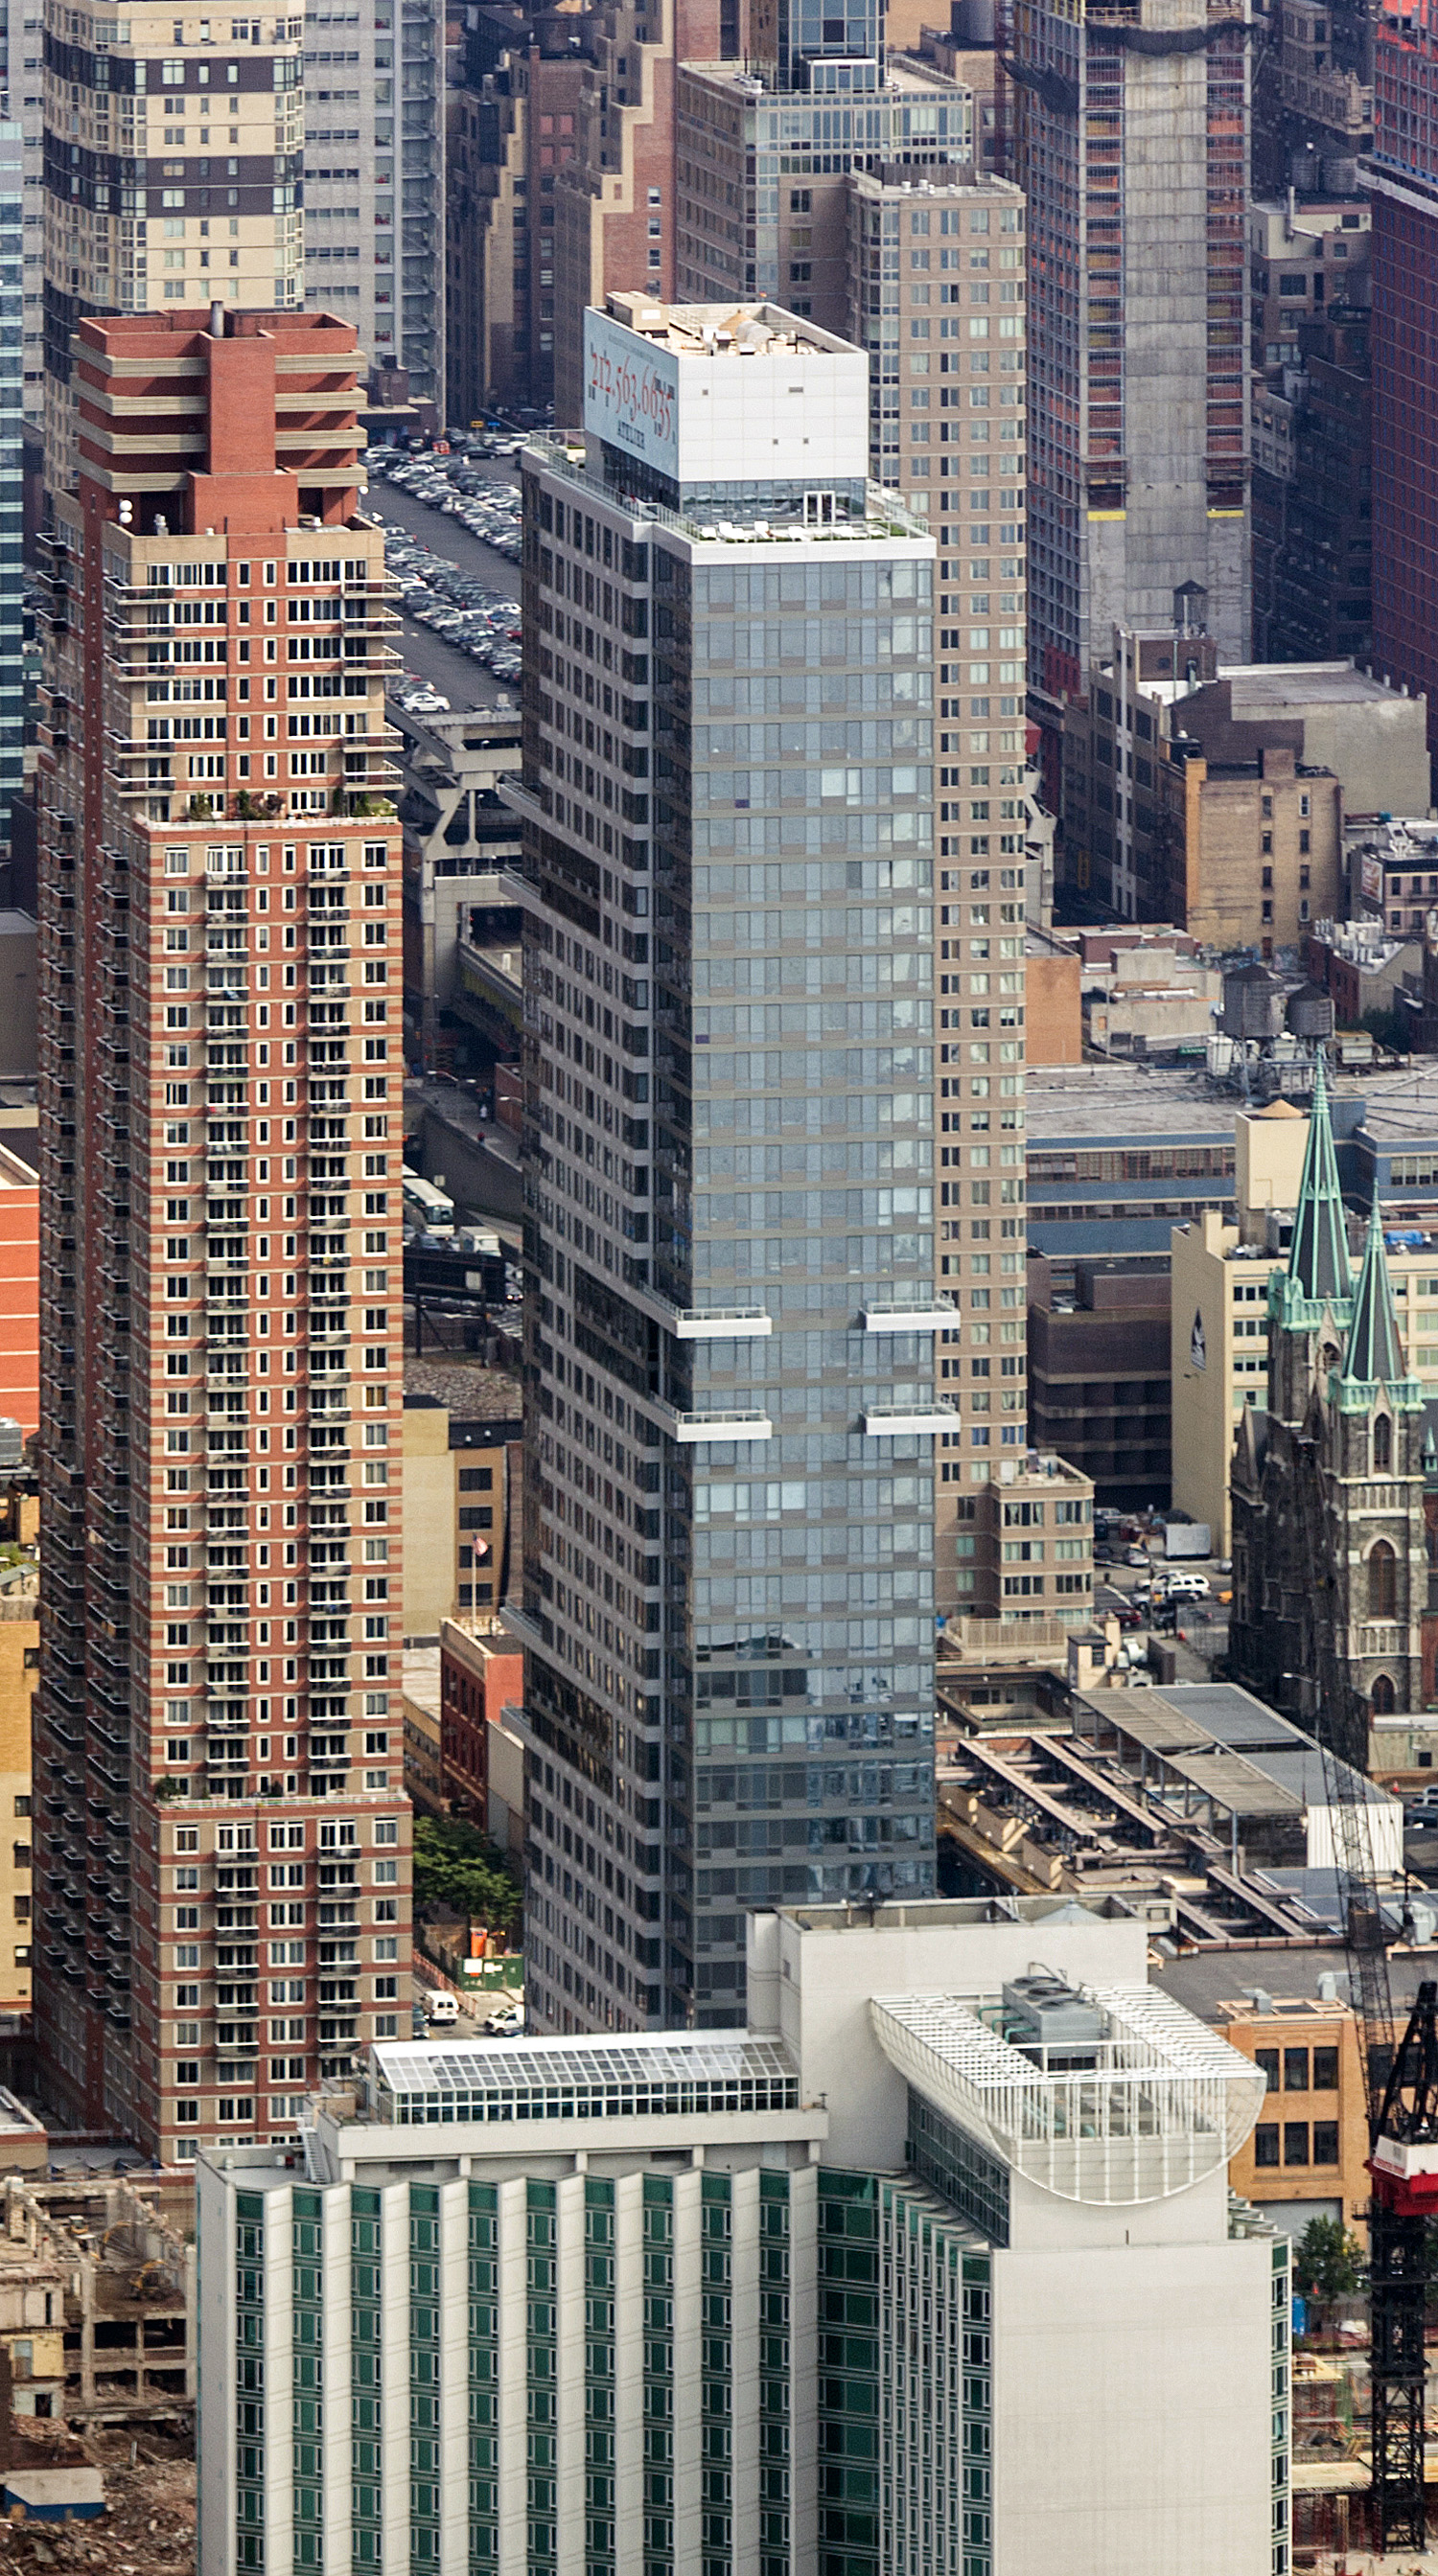 Atelier, New York City - View from a helicopter. © Mathias Beinling